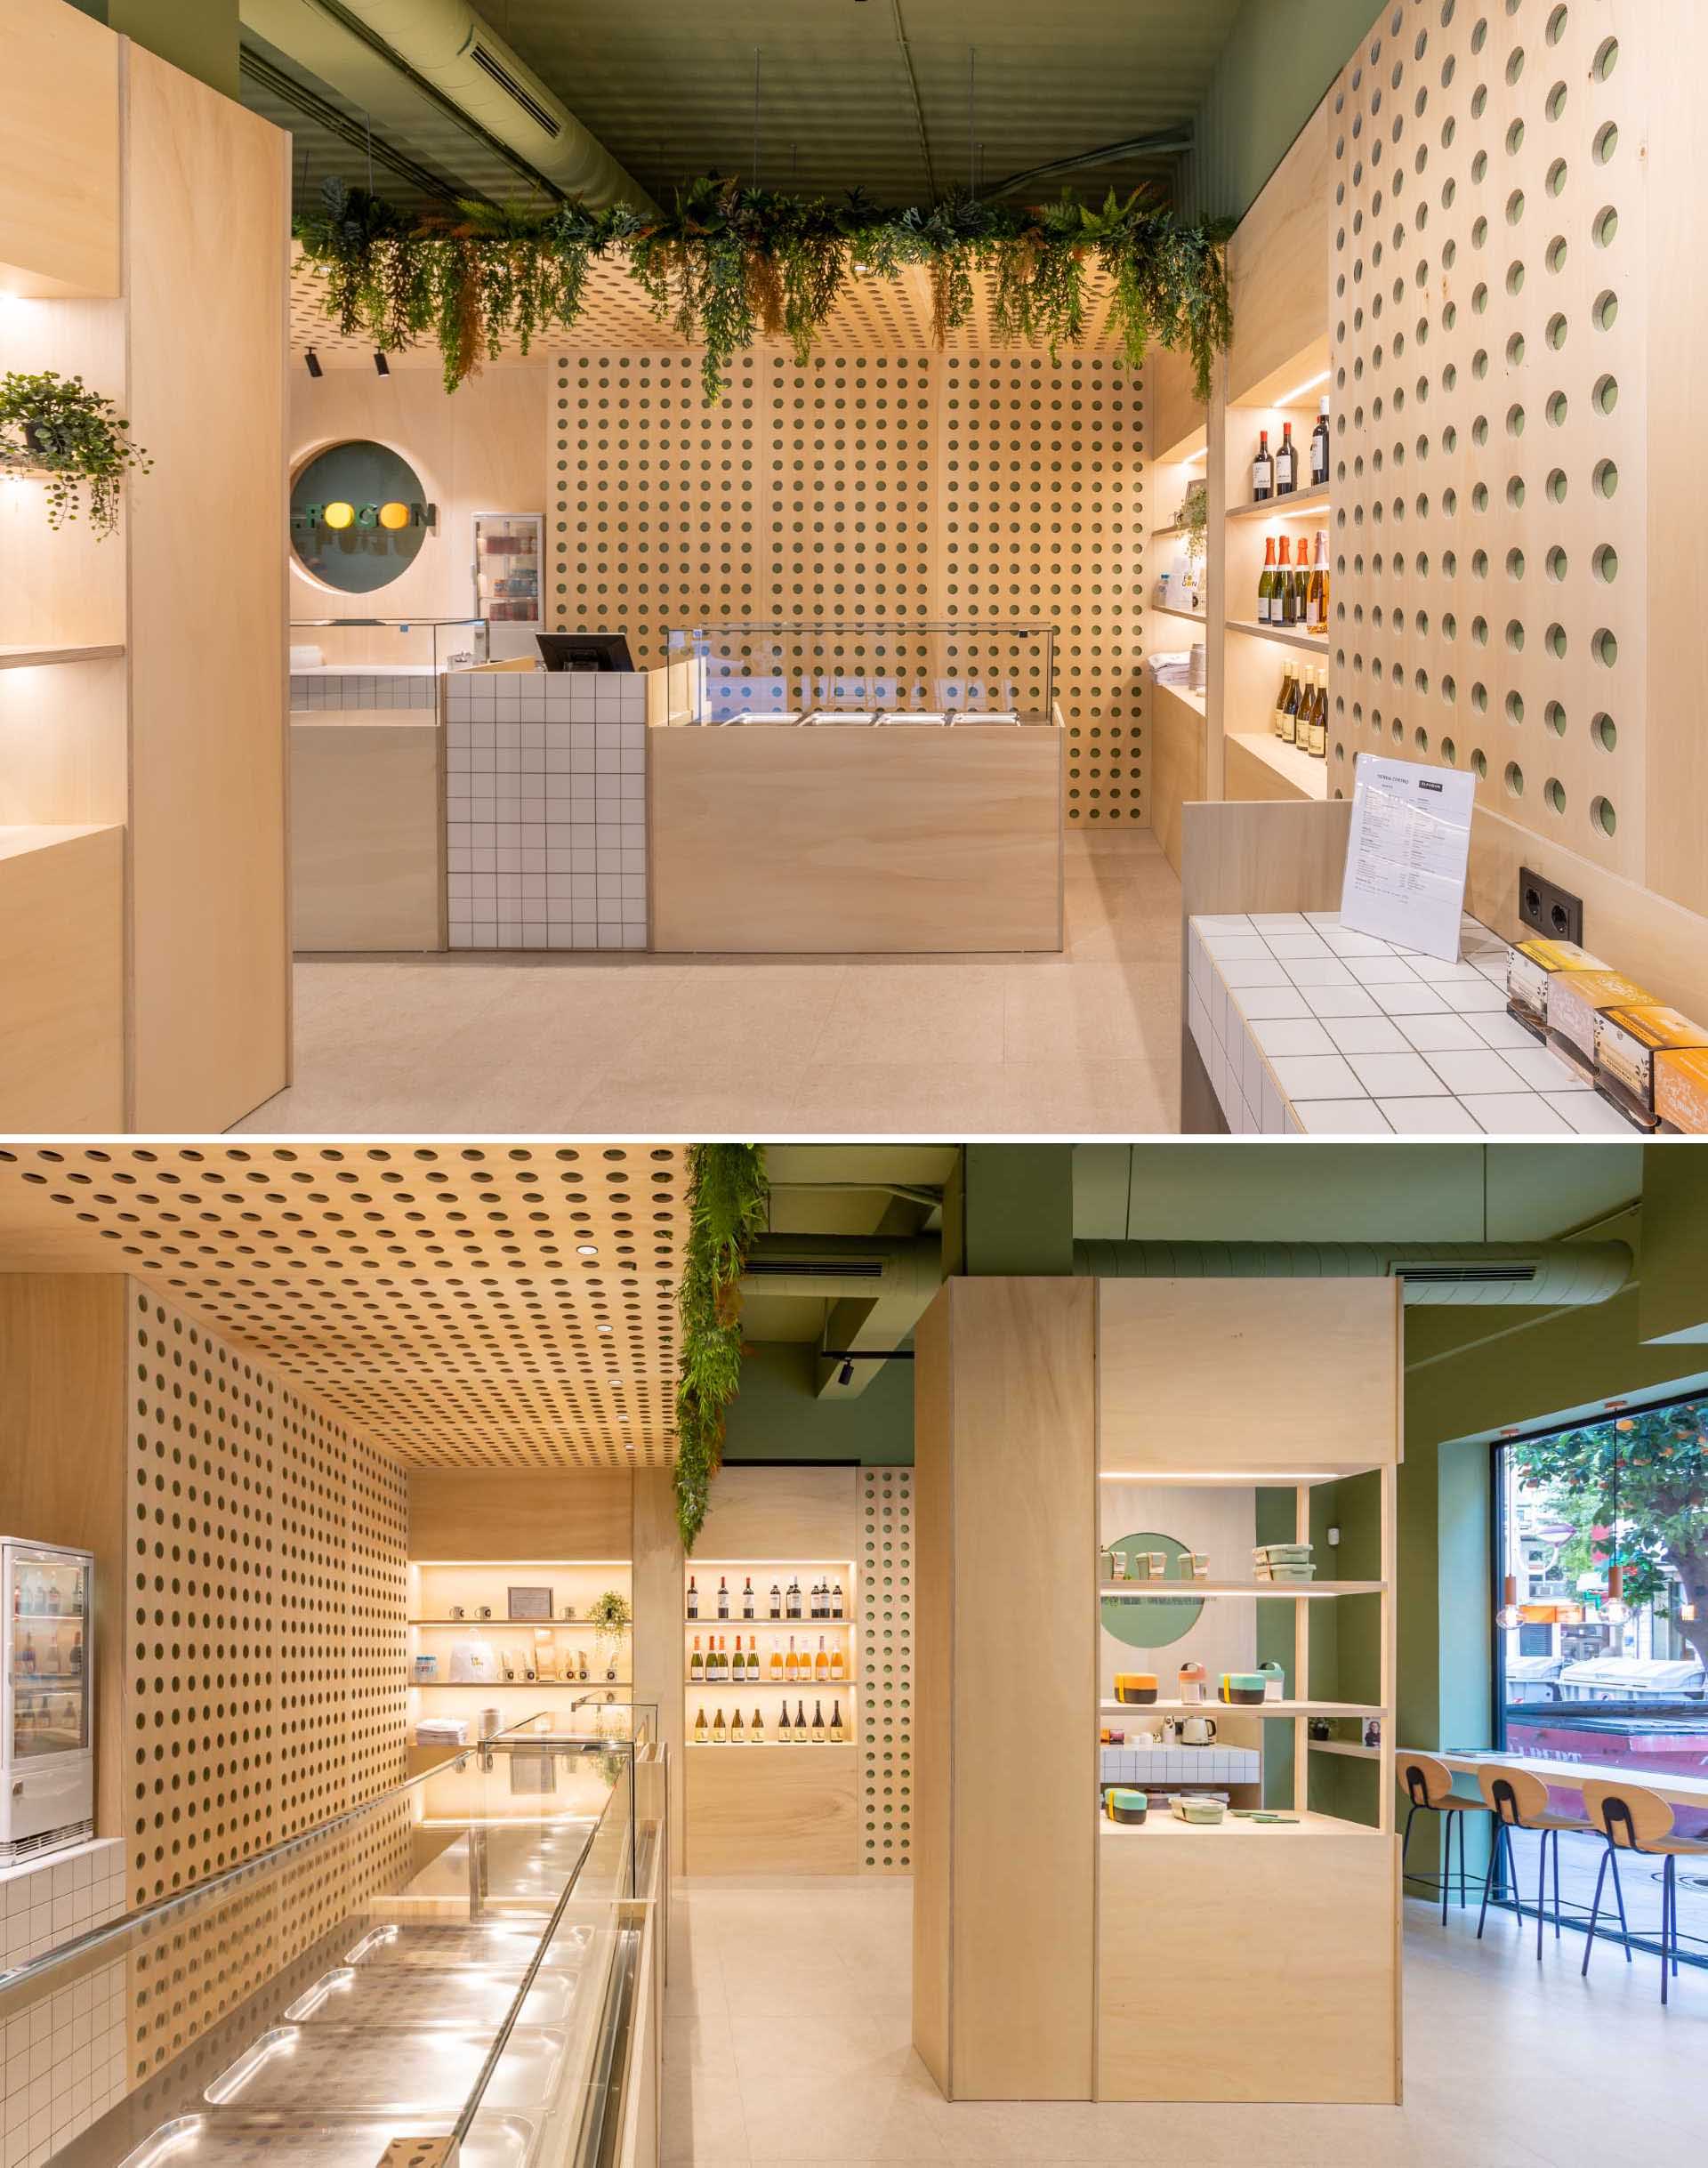 A modern takeaway shop with perforated wood panels, plants, and shelving with LED lighting.